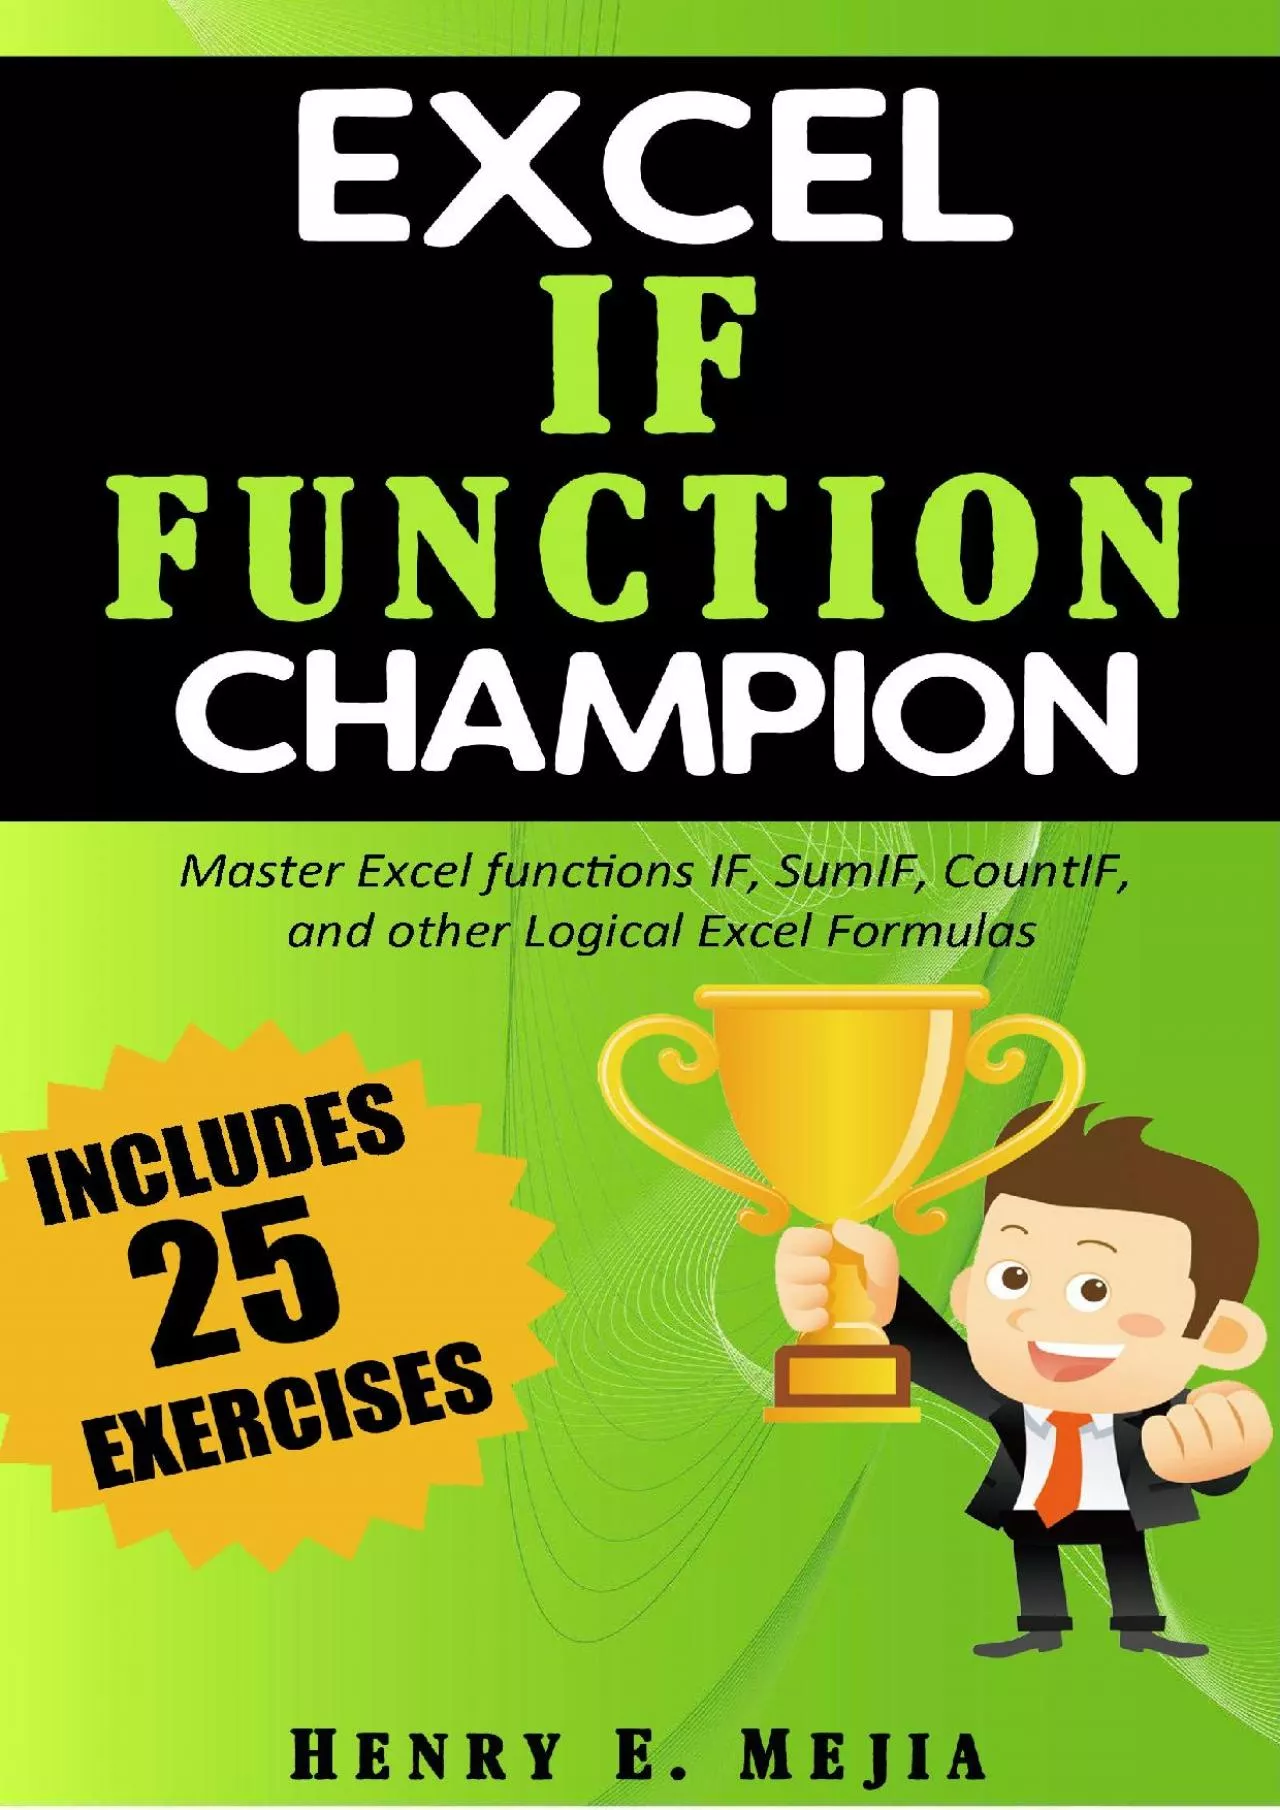 (READ)-Excel IF Function Champion: Master Excel functions IF, SumIF, CountIF, and other